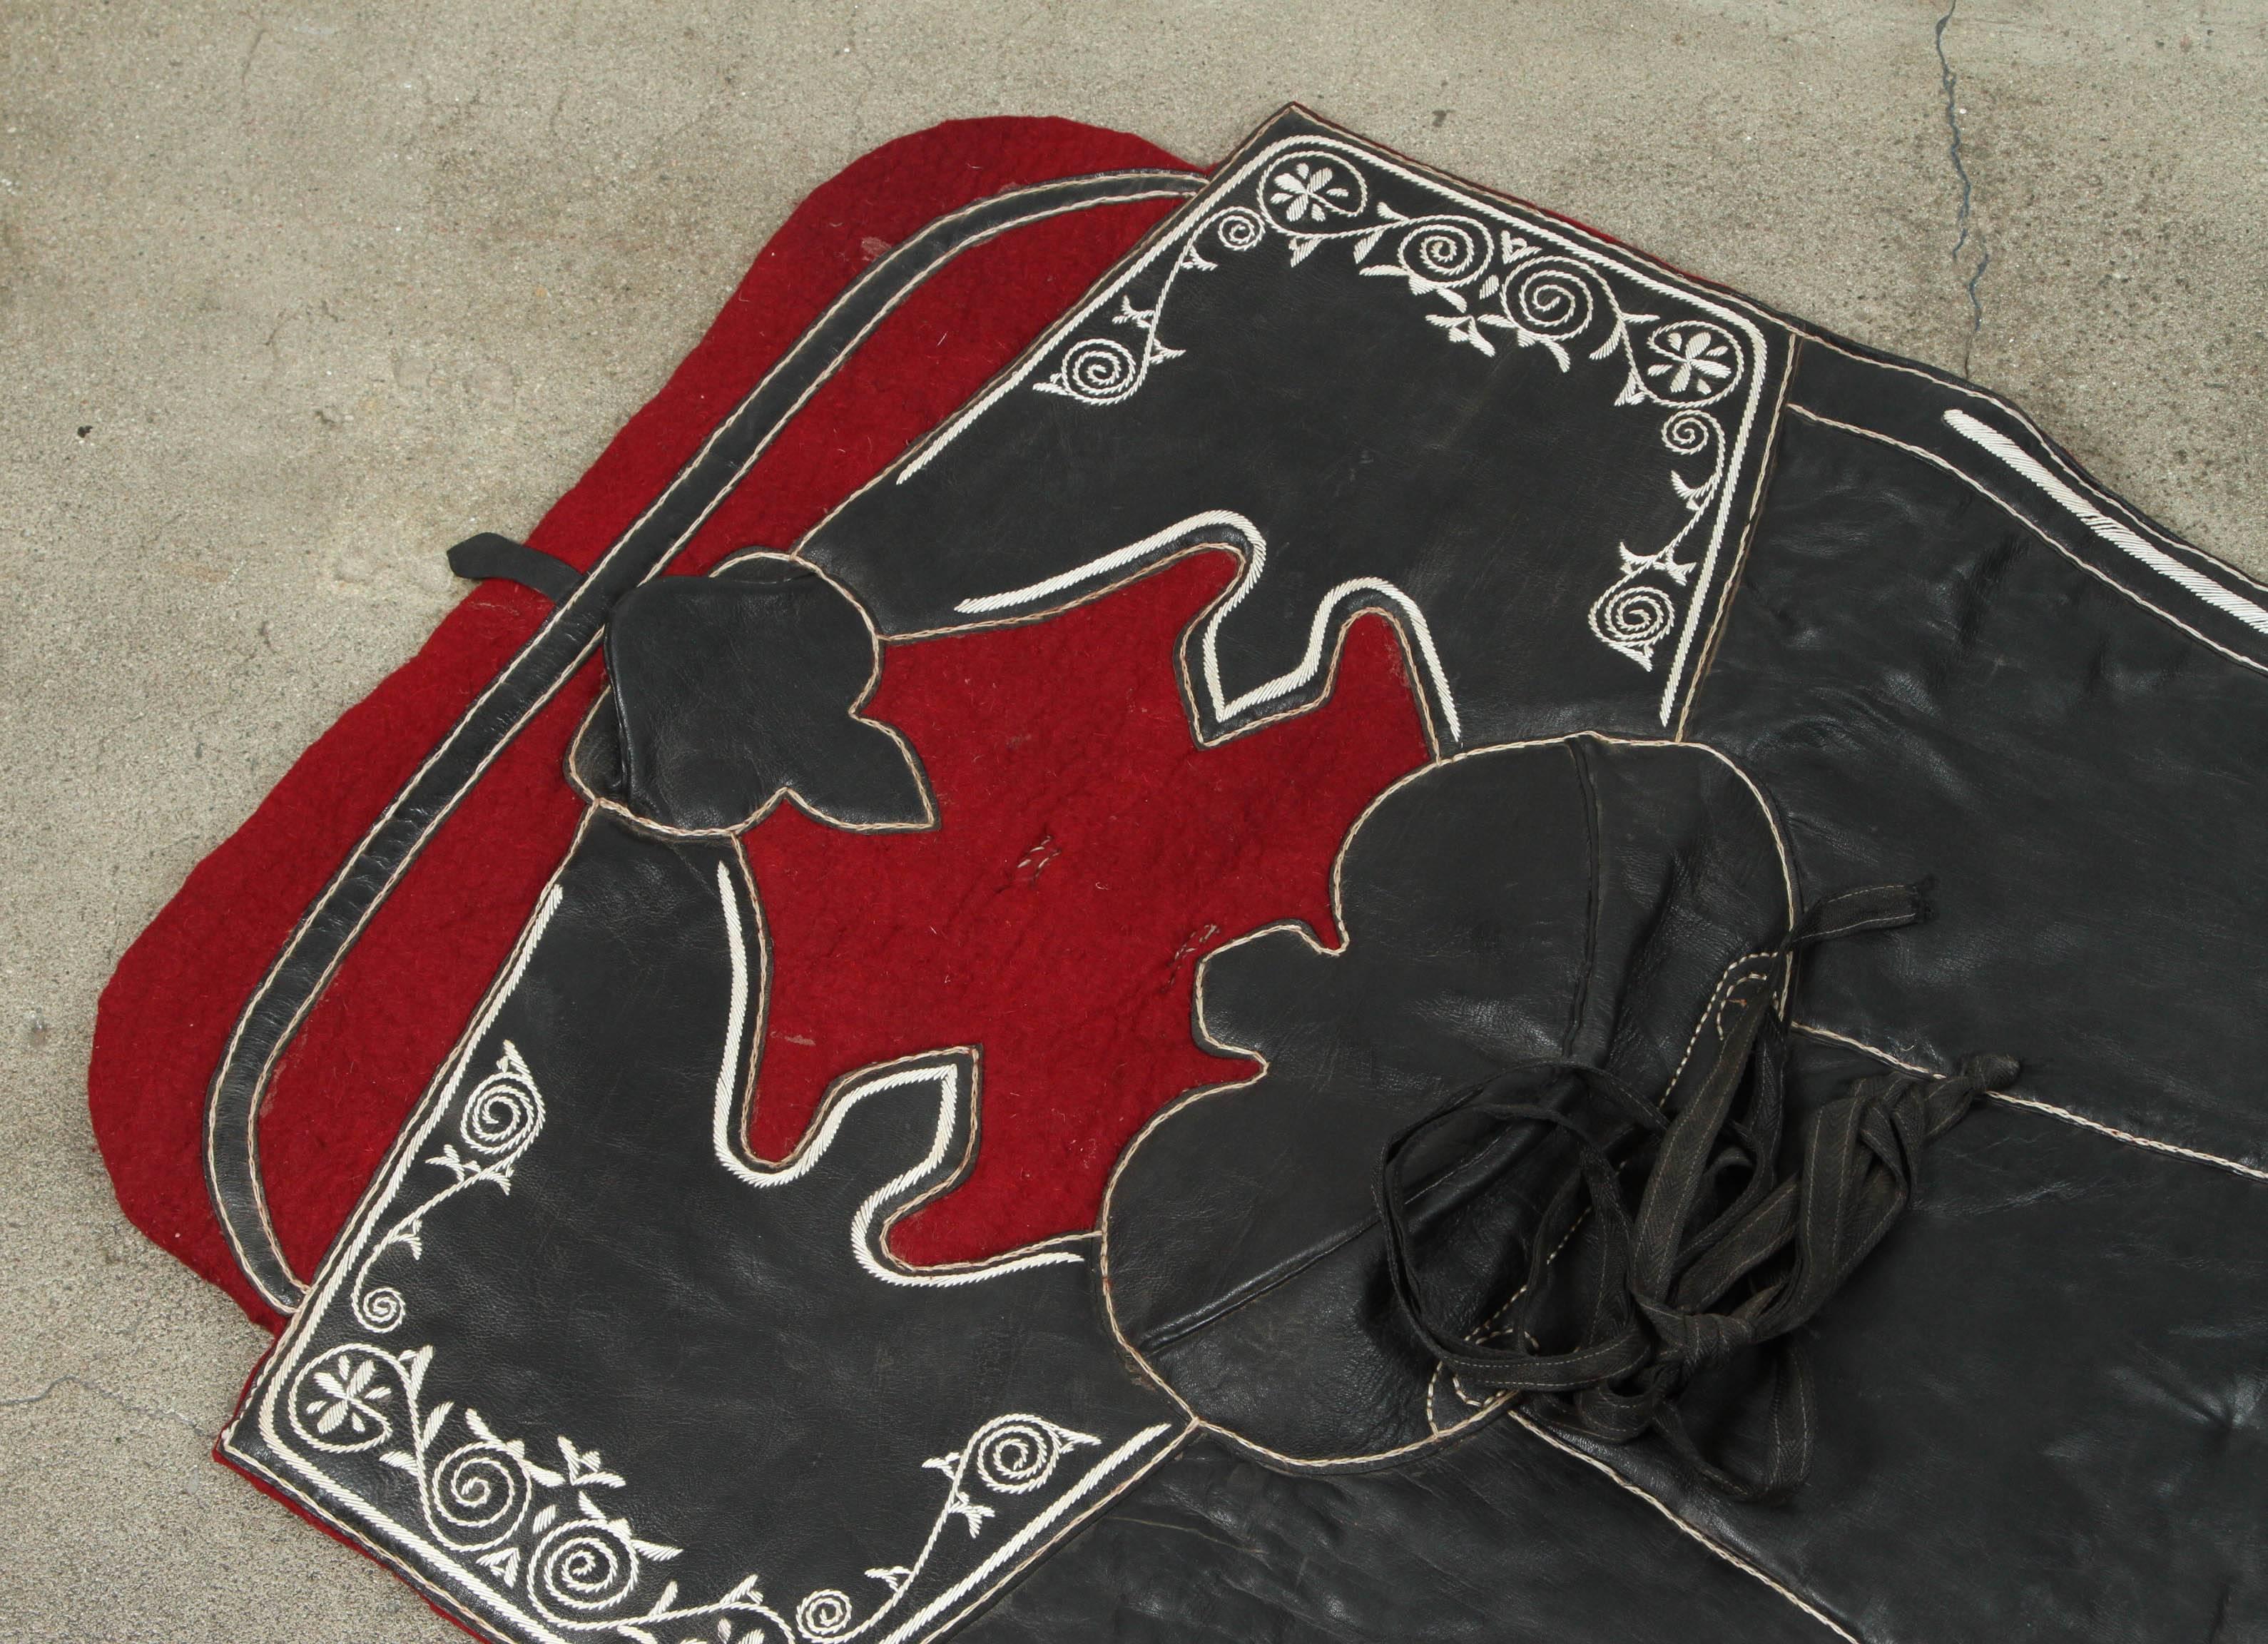 Handcrafted Moroccan horse Saddle pad or blanket, made of black leather, made for a ceremonial Festival and shows.
The central section of the saddle pad is made of black leather embroidered with white threads.
Great to use as a display piece of